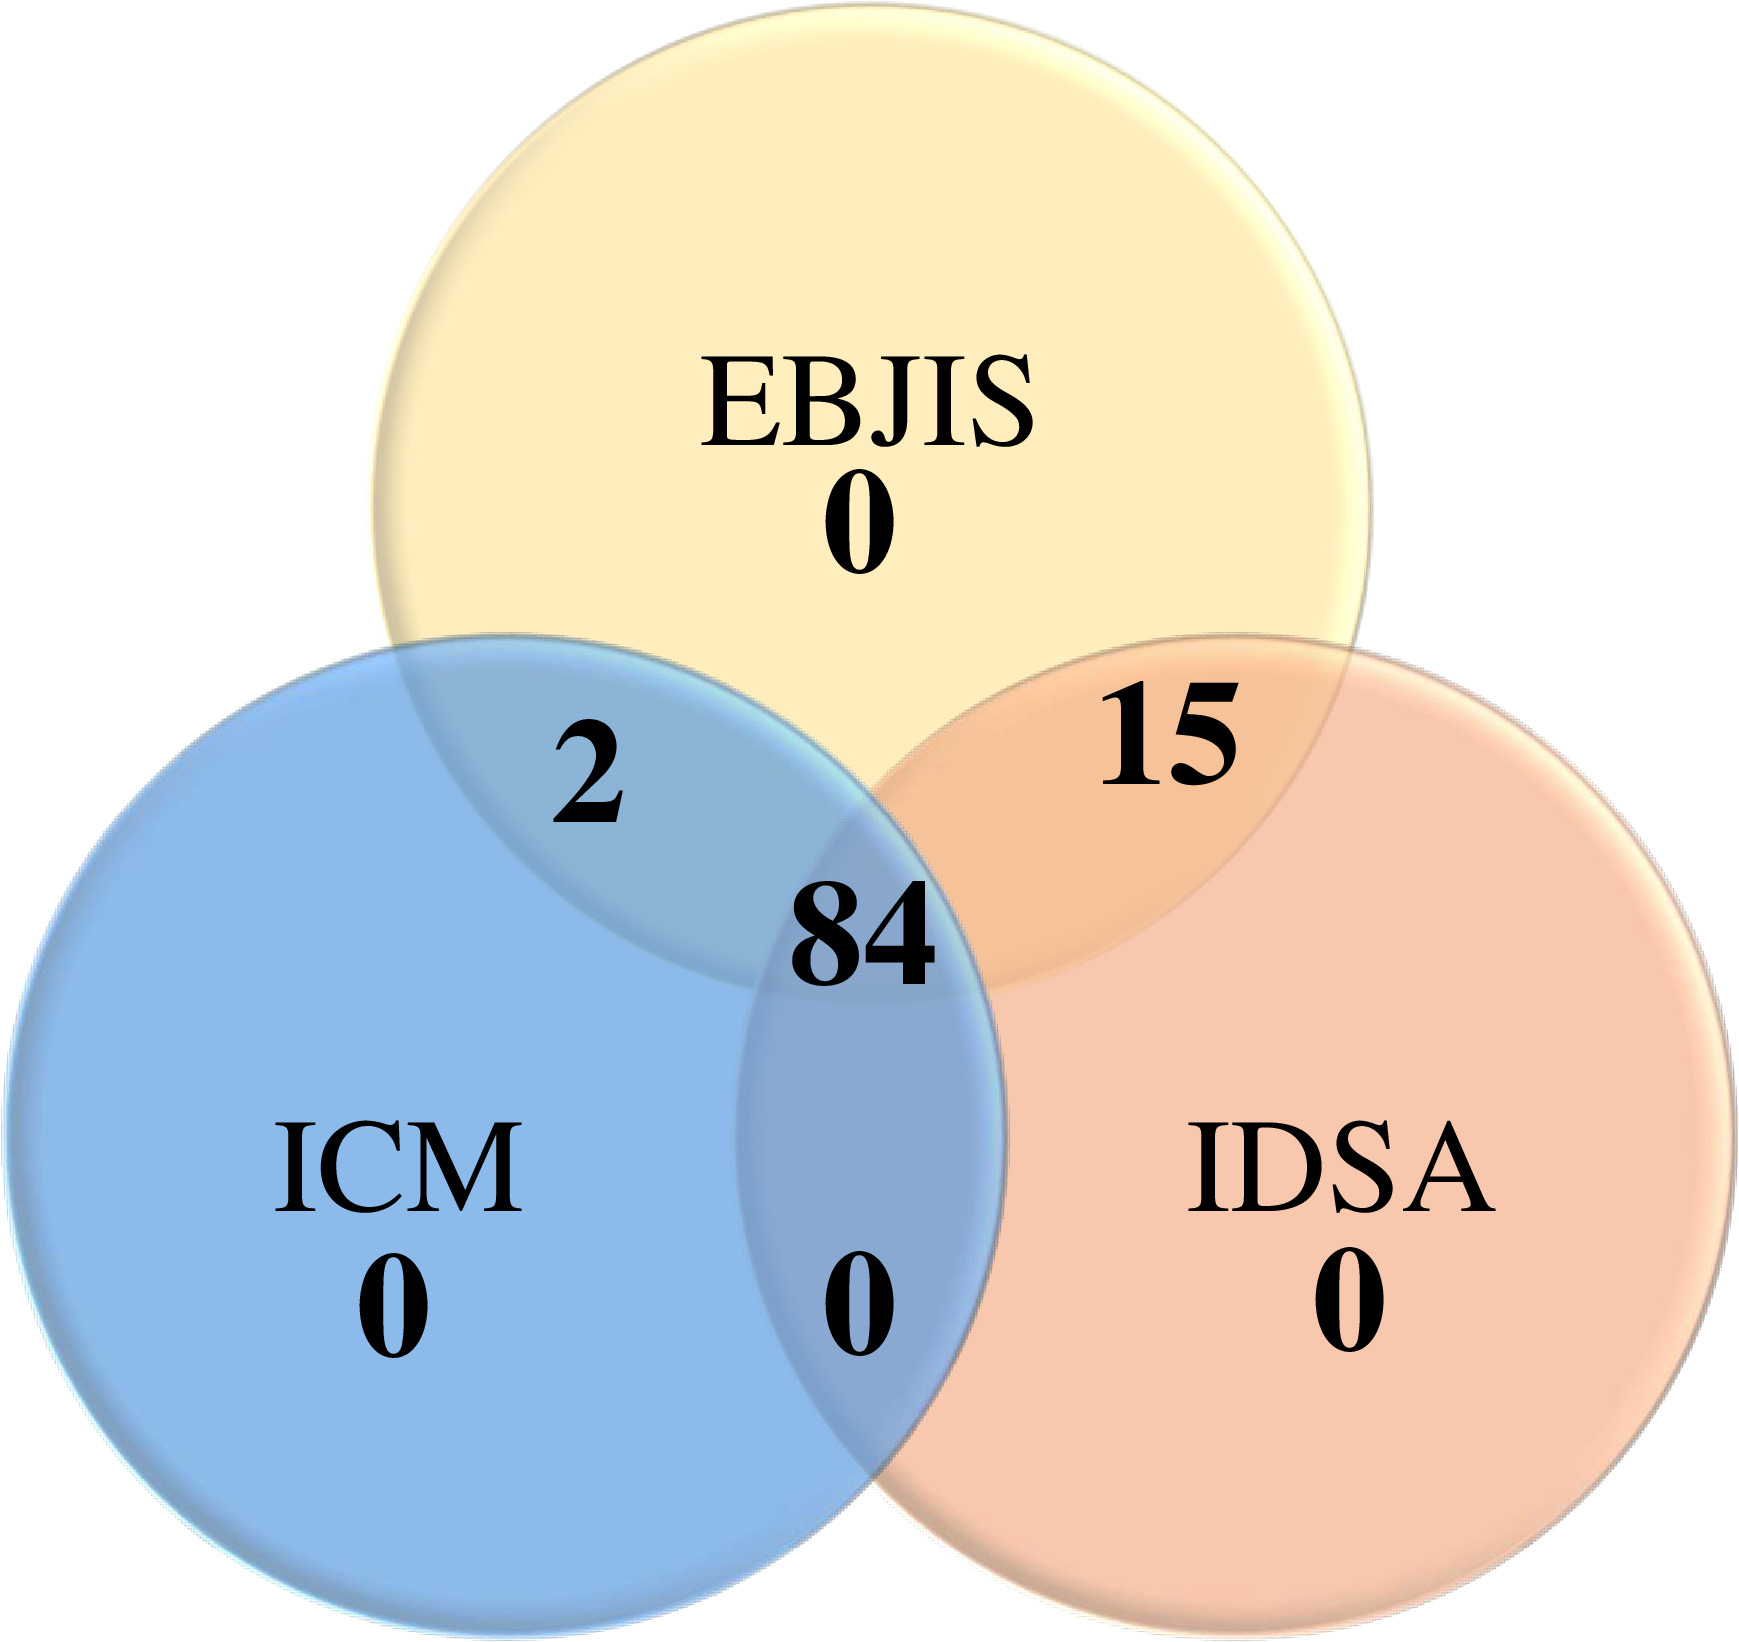 Fig. 3 
            Venn diagram of the detected infections based on the European Bone and Joint Infection Society (EBJIS), Infectious Diseases Society of America (IDSA), and International Consensus Meeting (ICM) definitions.
          